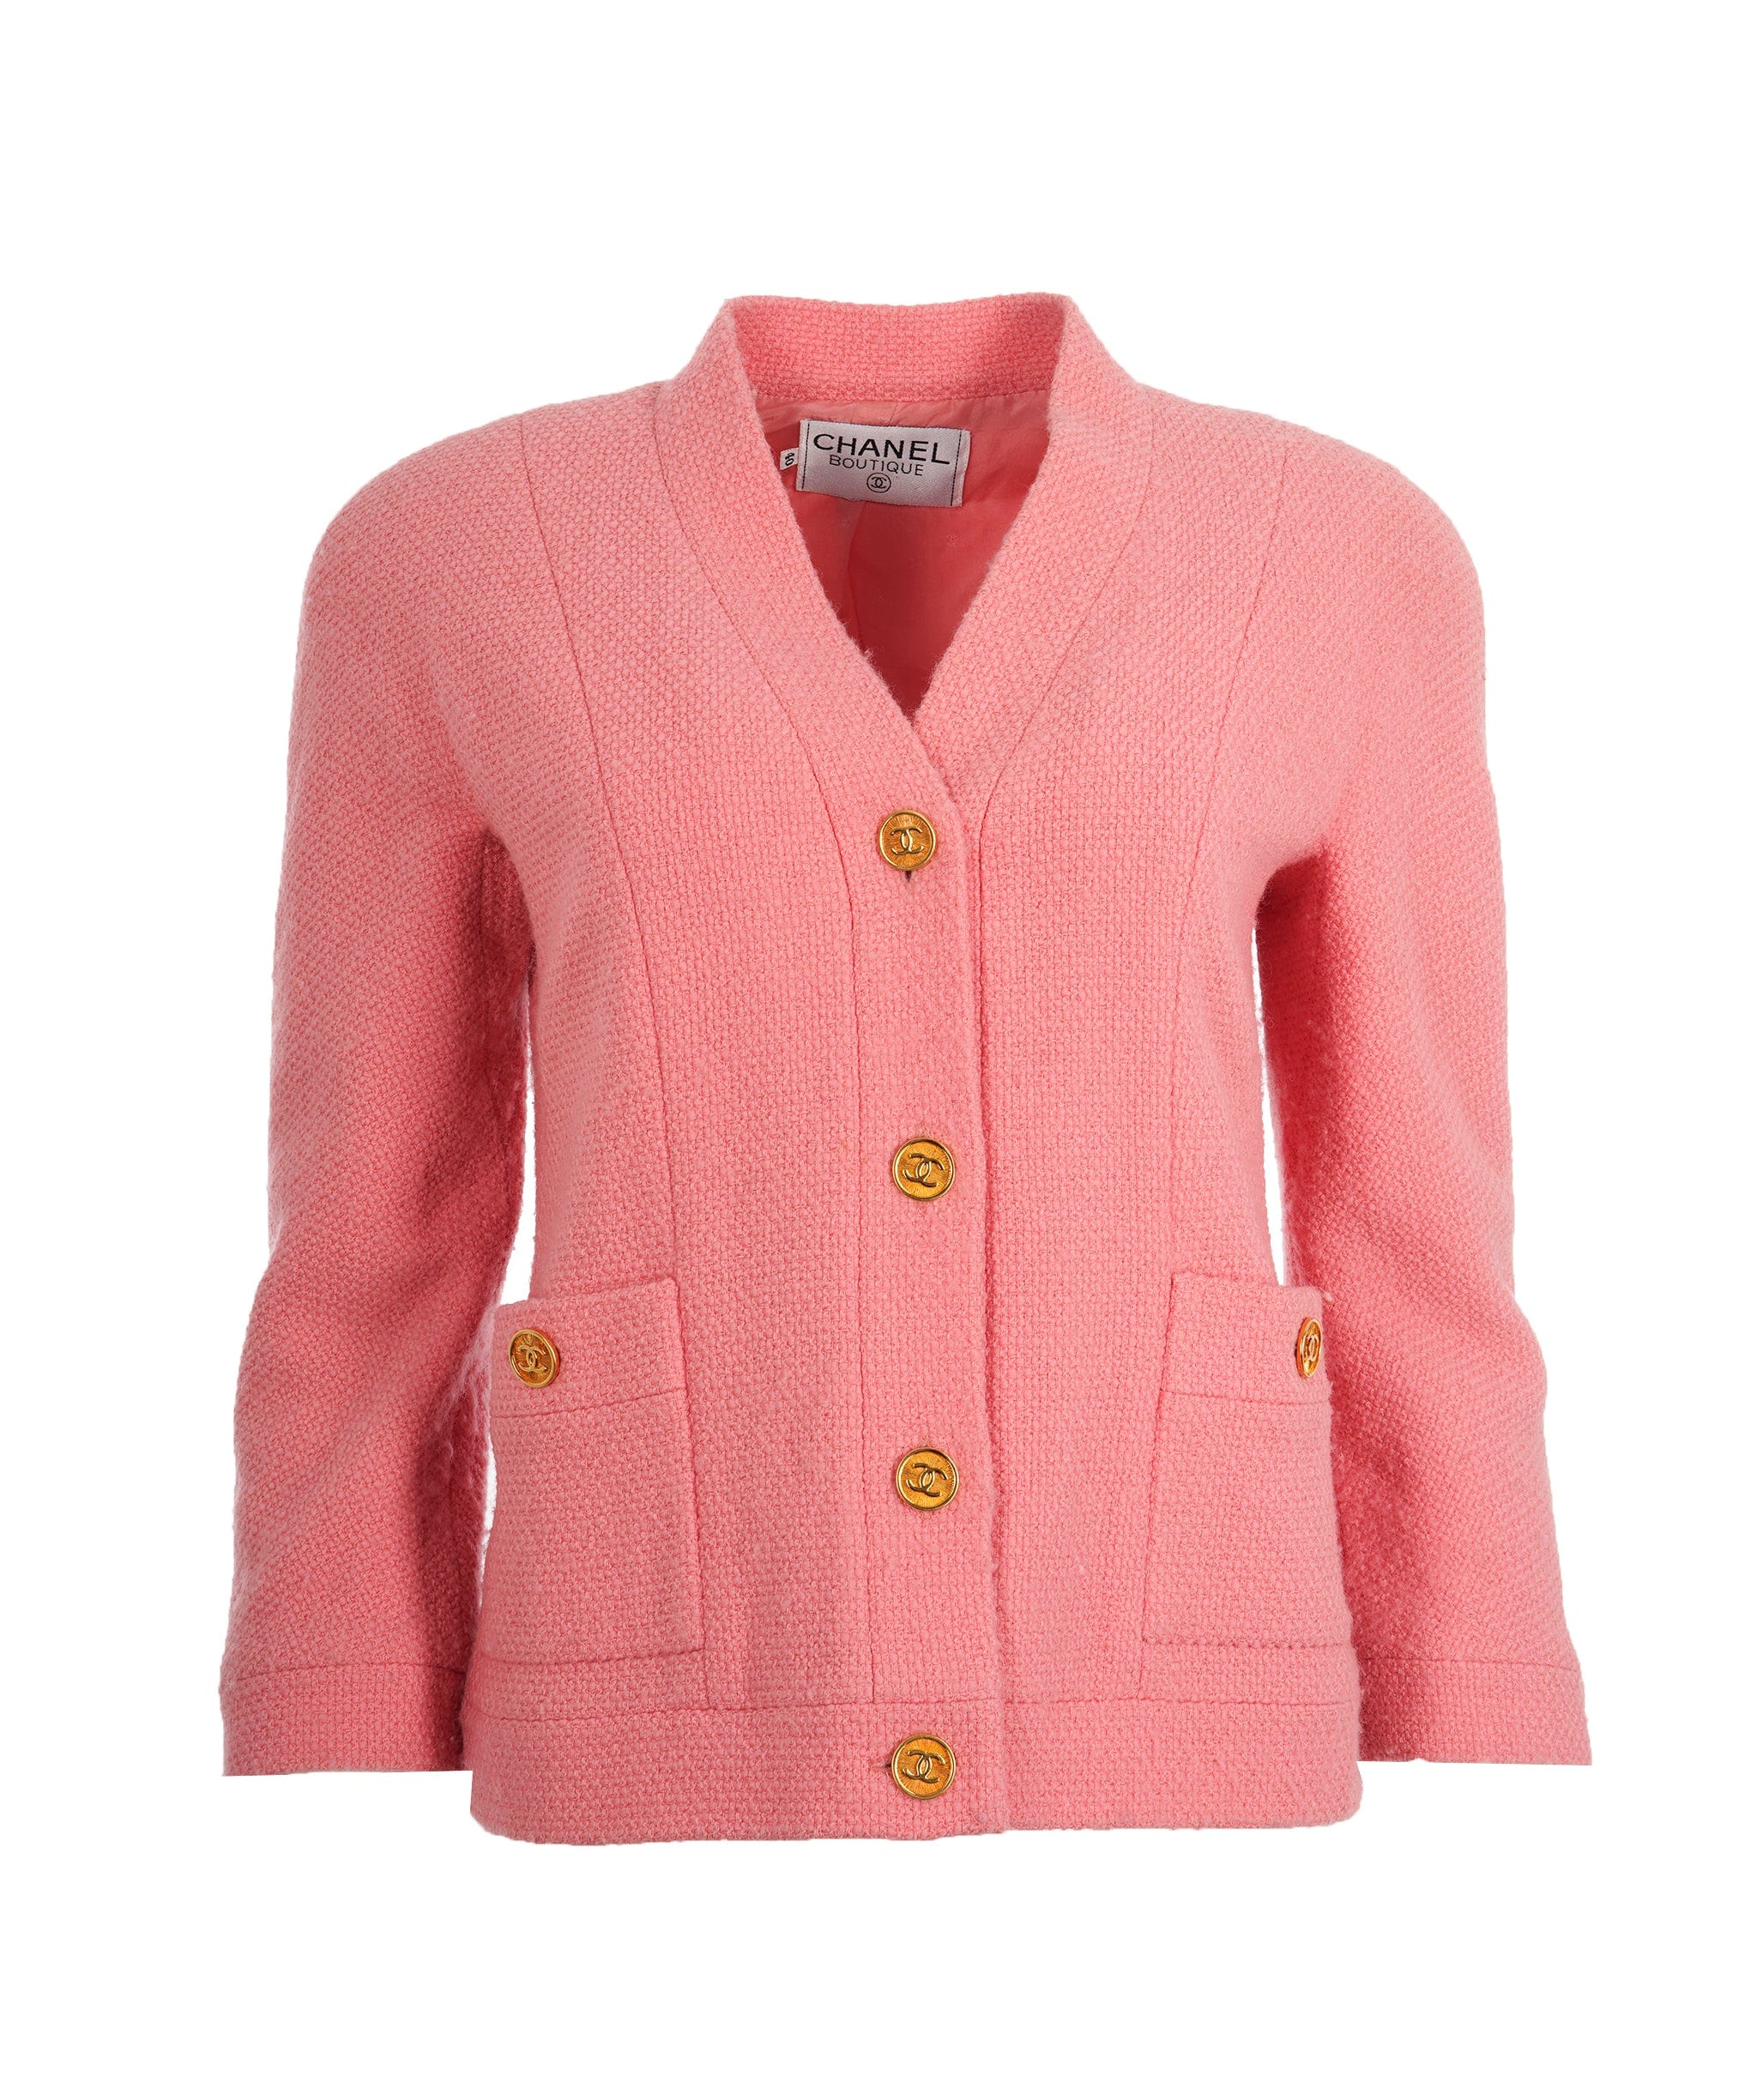 Chanel Chanel Pink Double Breasted Blazer ALC1314